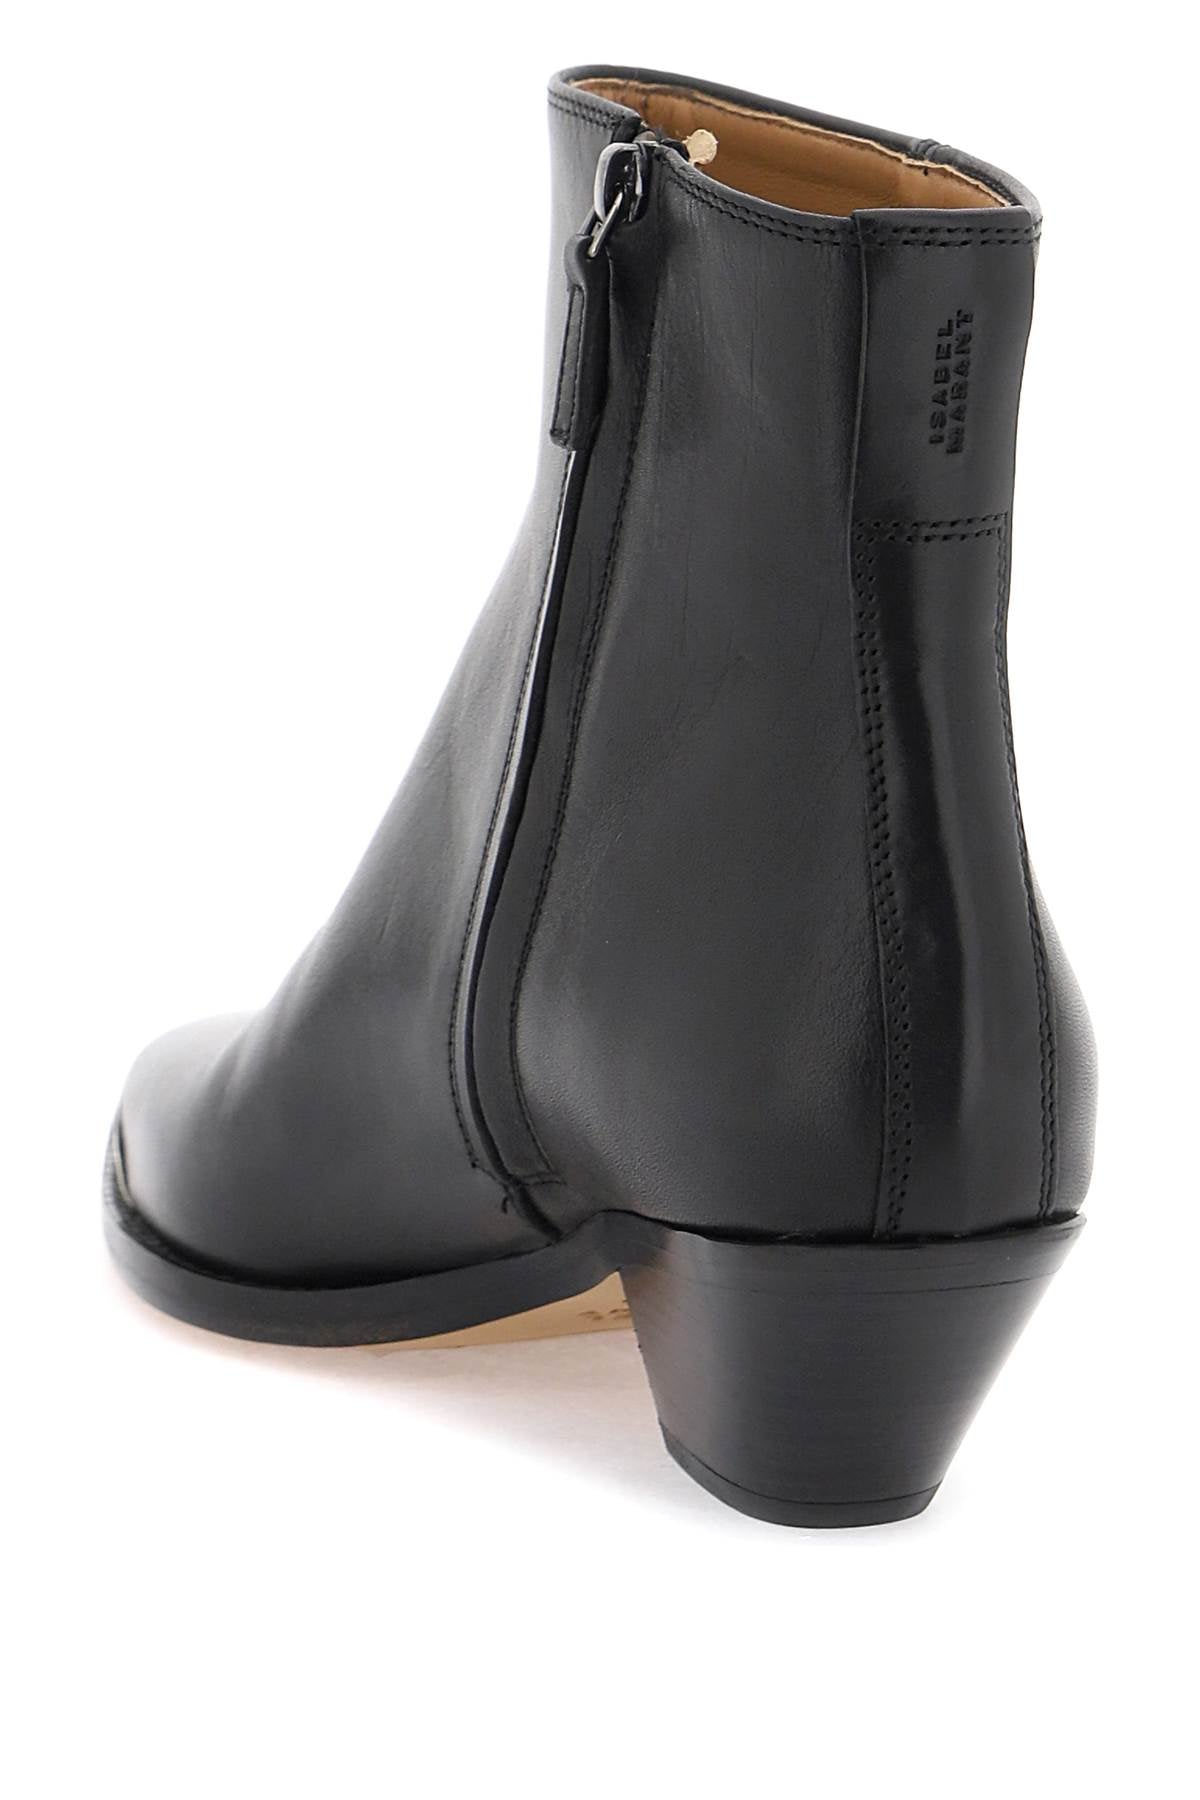 Isabel marant adnae ankle boots-2